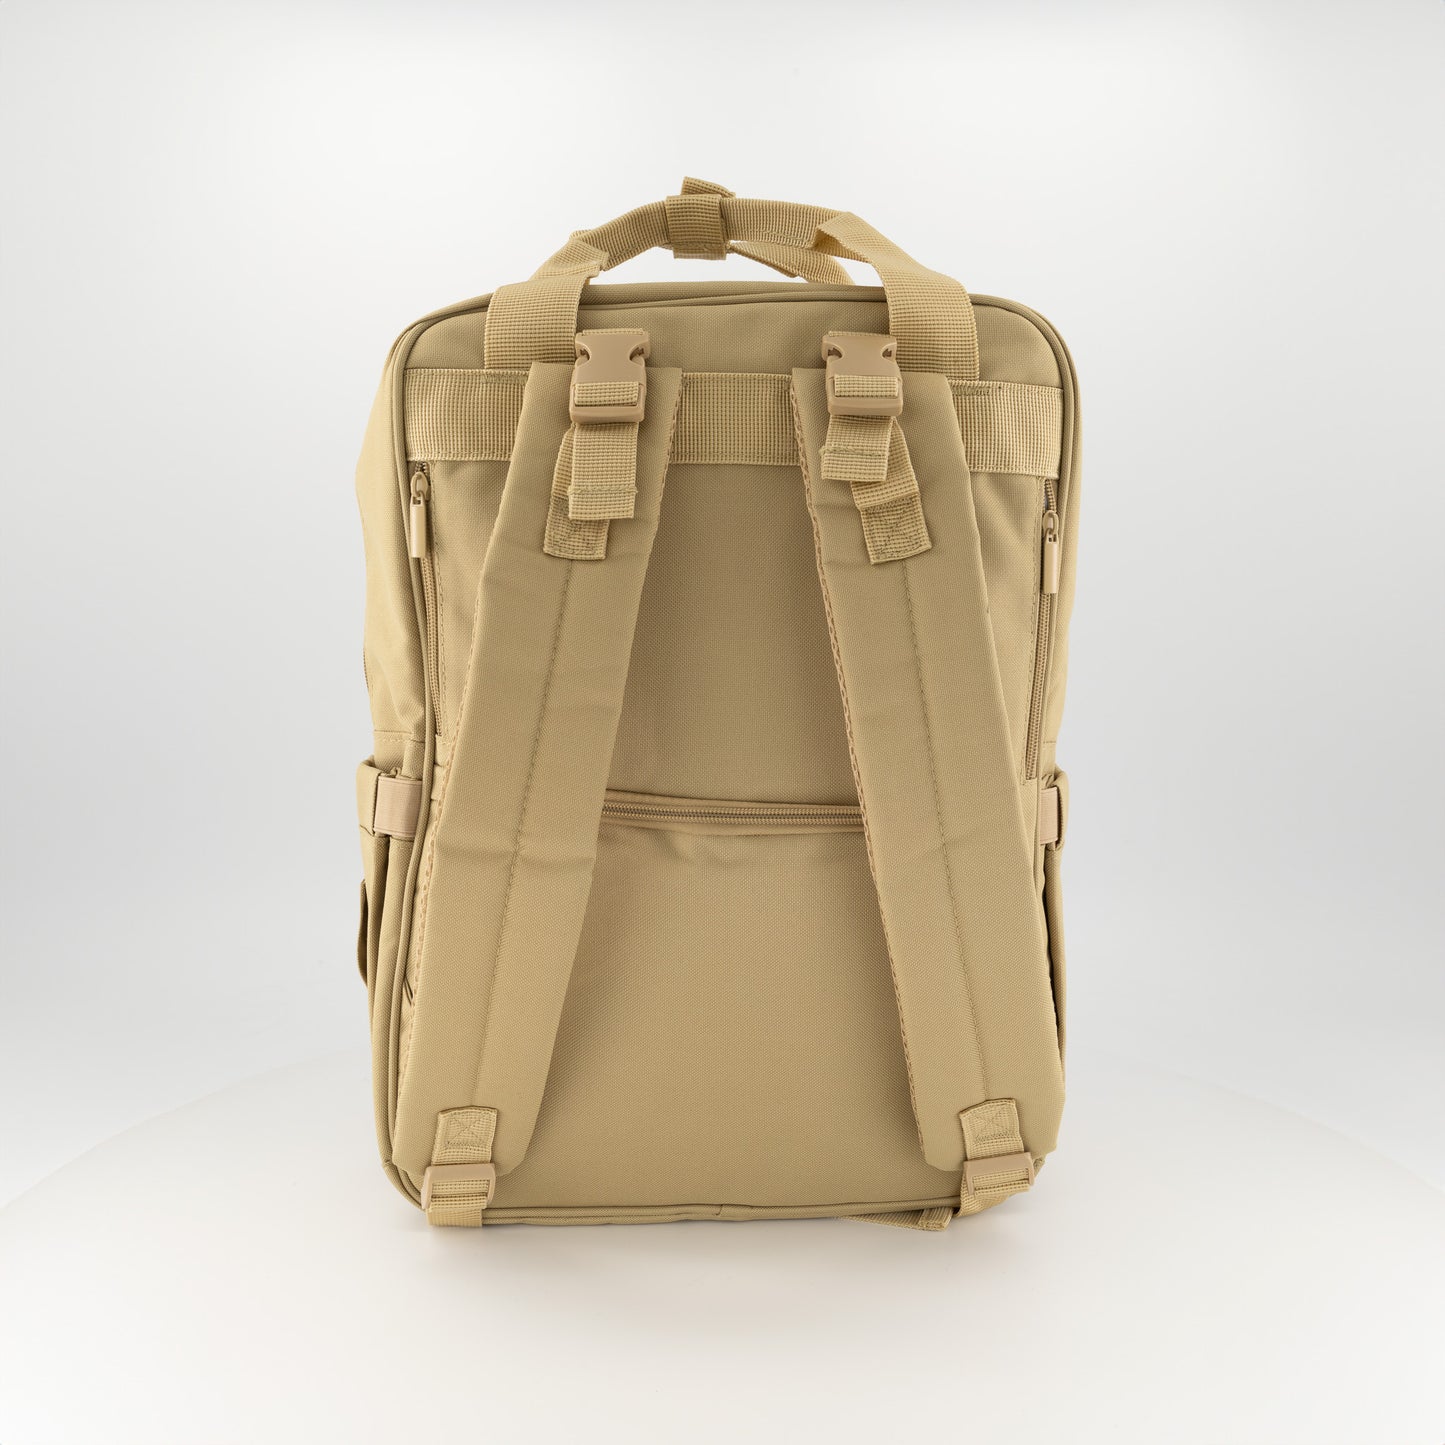 The Camy Nappy Backpack (Sandy Beige)